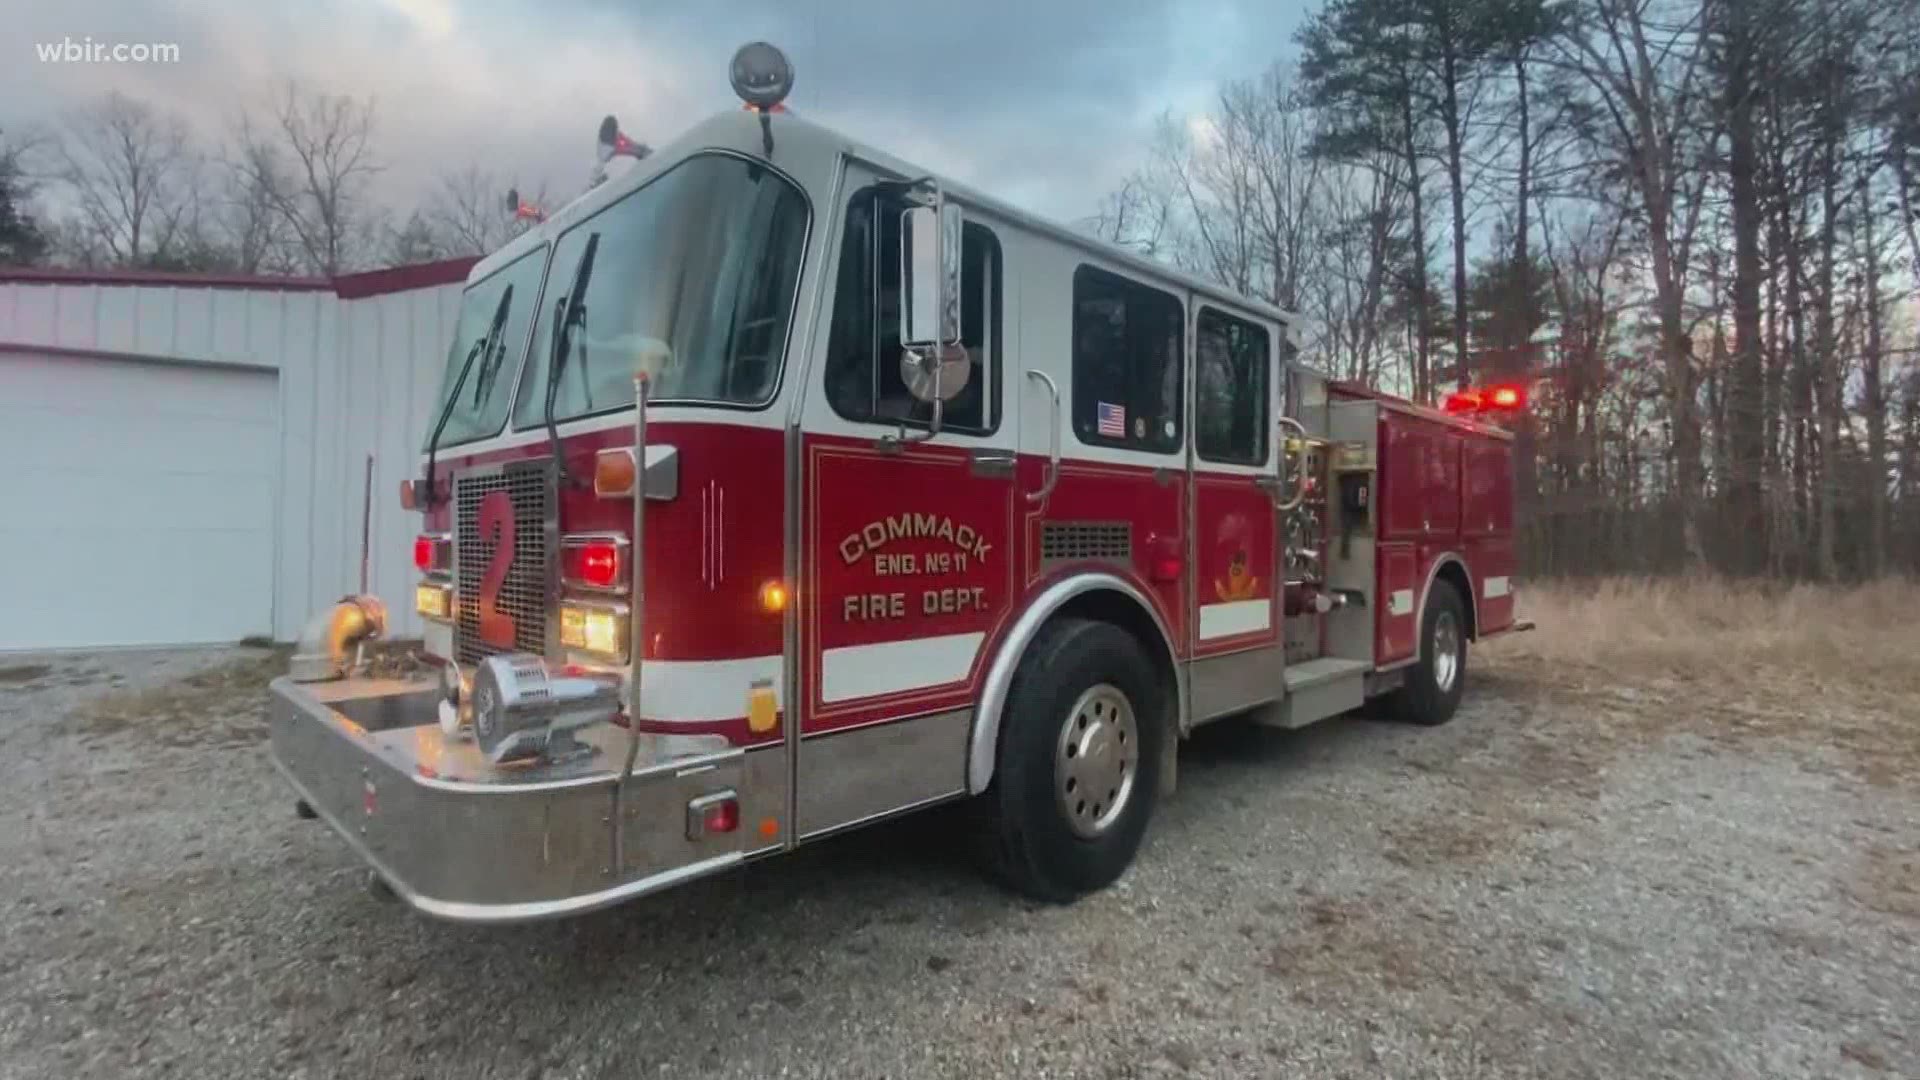 A small Morgan County community is a little safer after getting a surprise that will save lives, replacing equipment that was built in the 1970s.